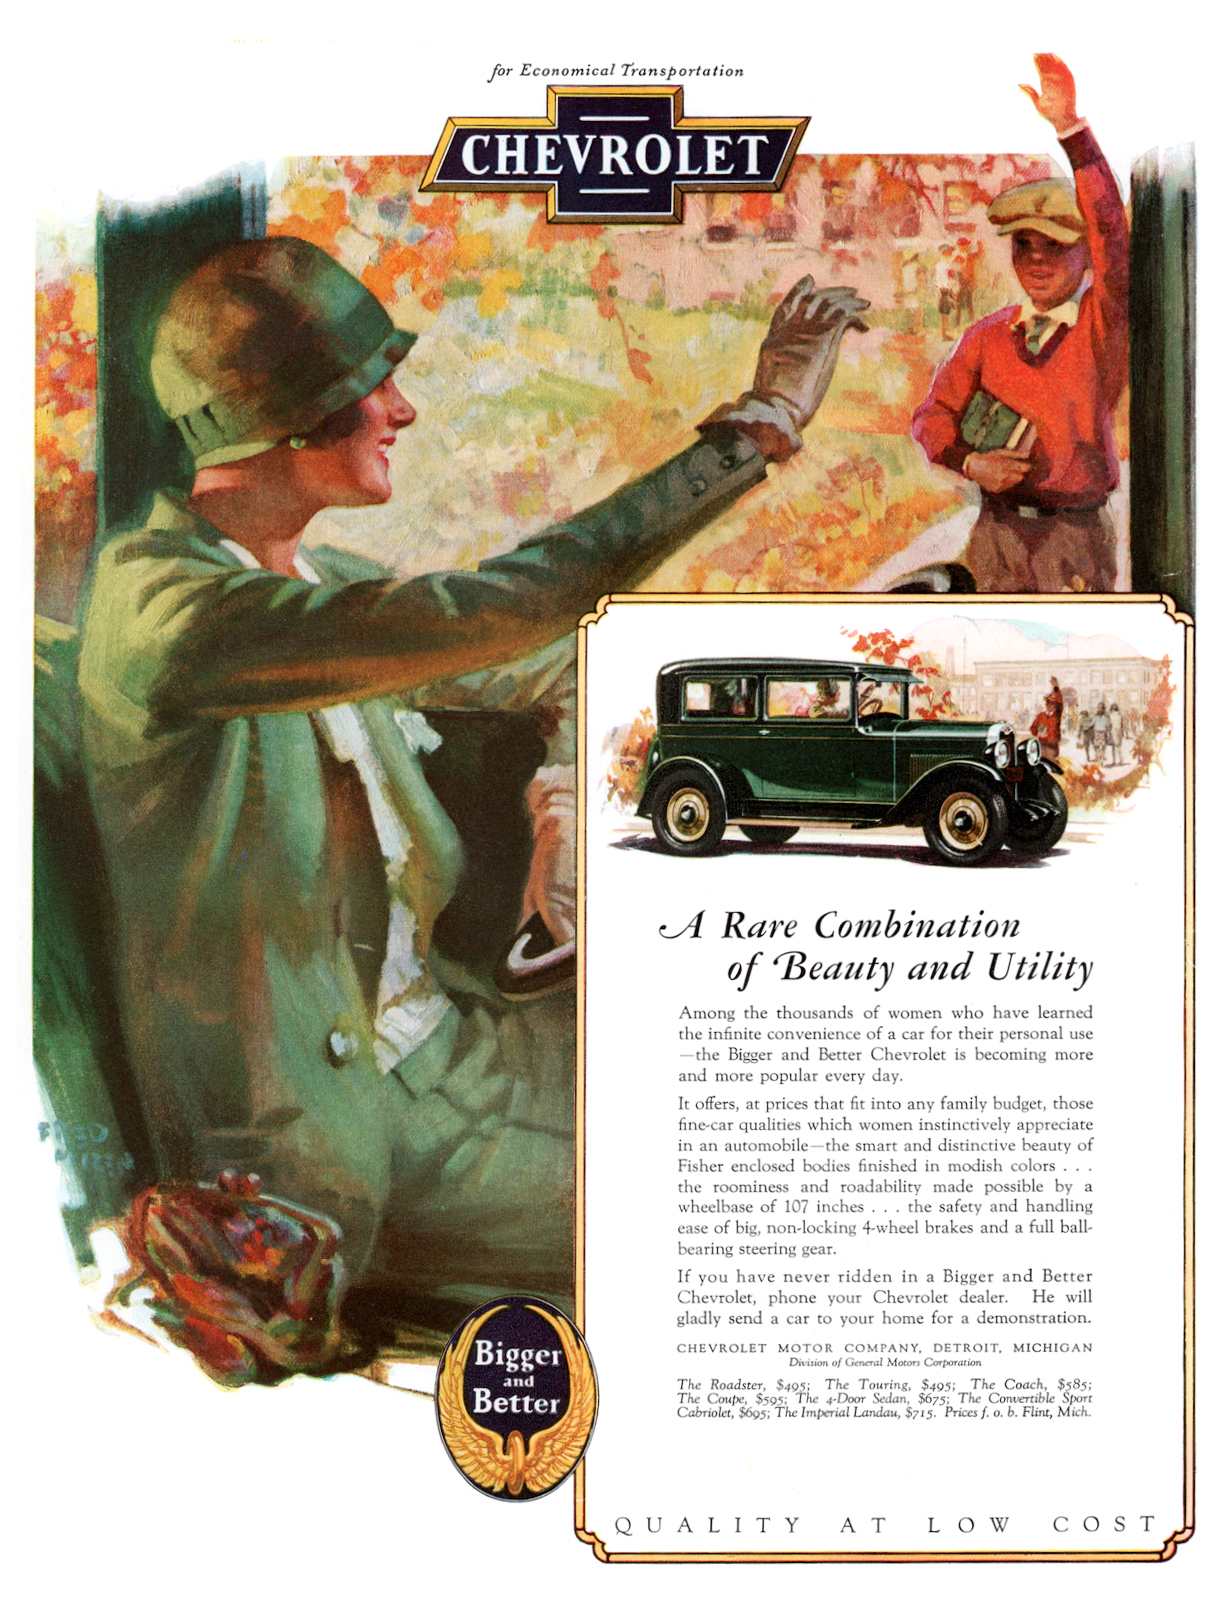 Chevrolet Ad (September, 1928): A Rare Combination of Beauty and Utility - Illustrated by Fred Mizen